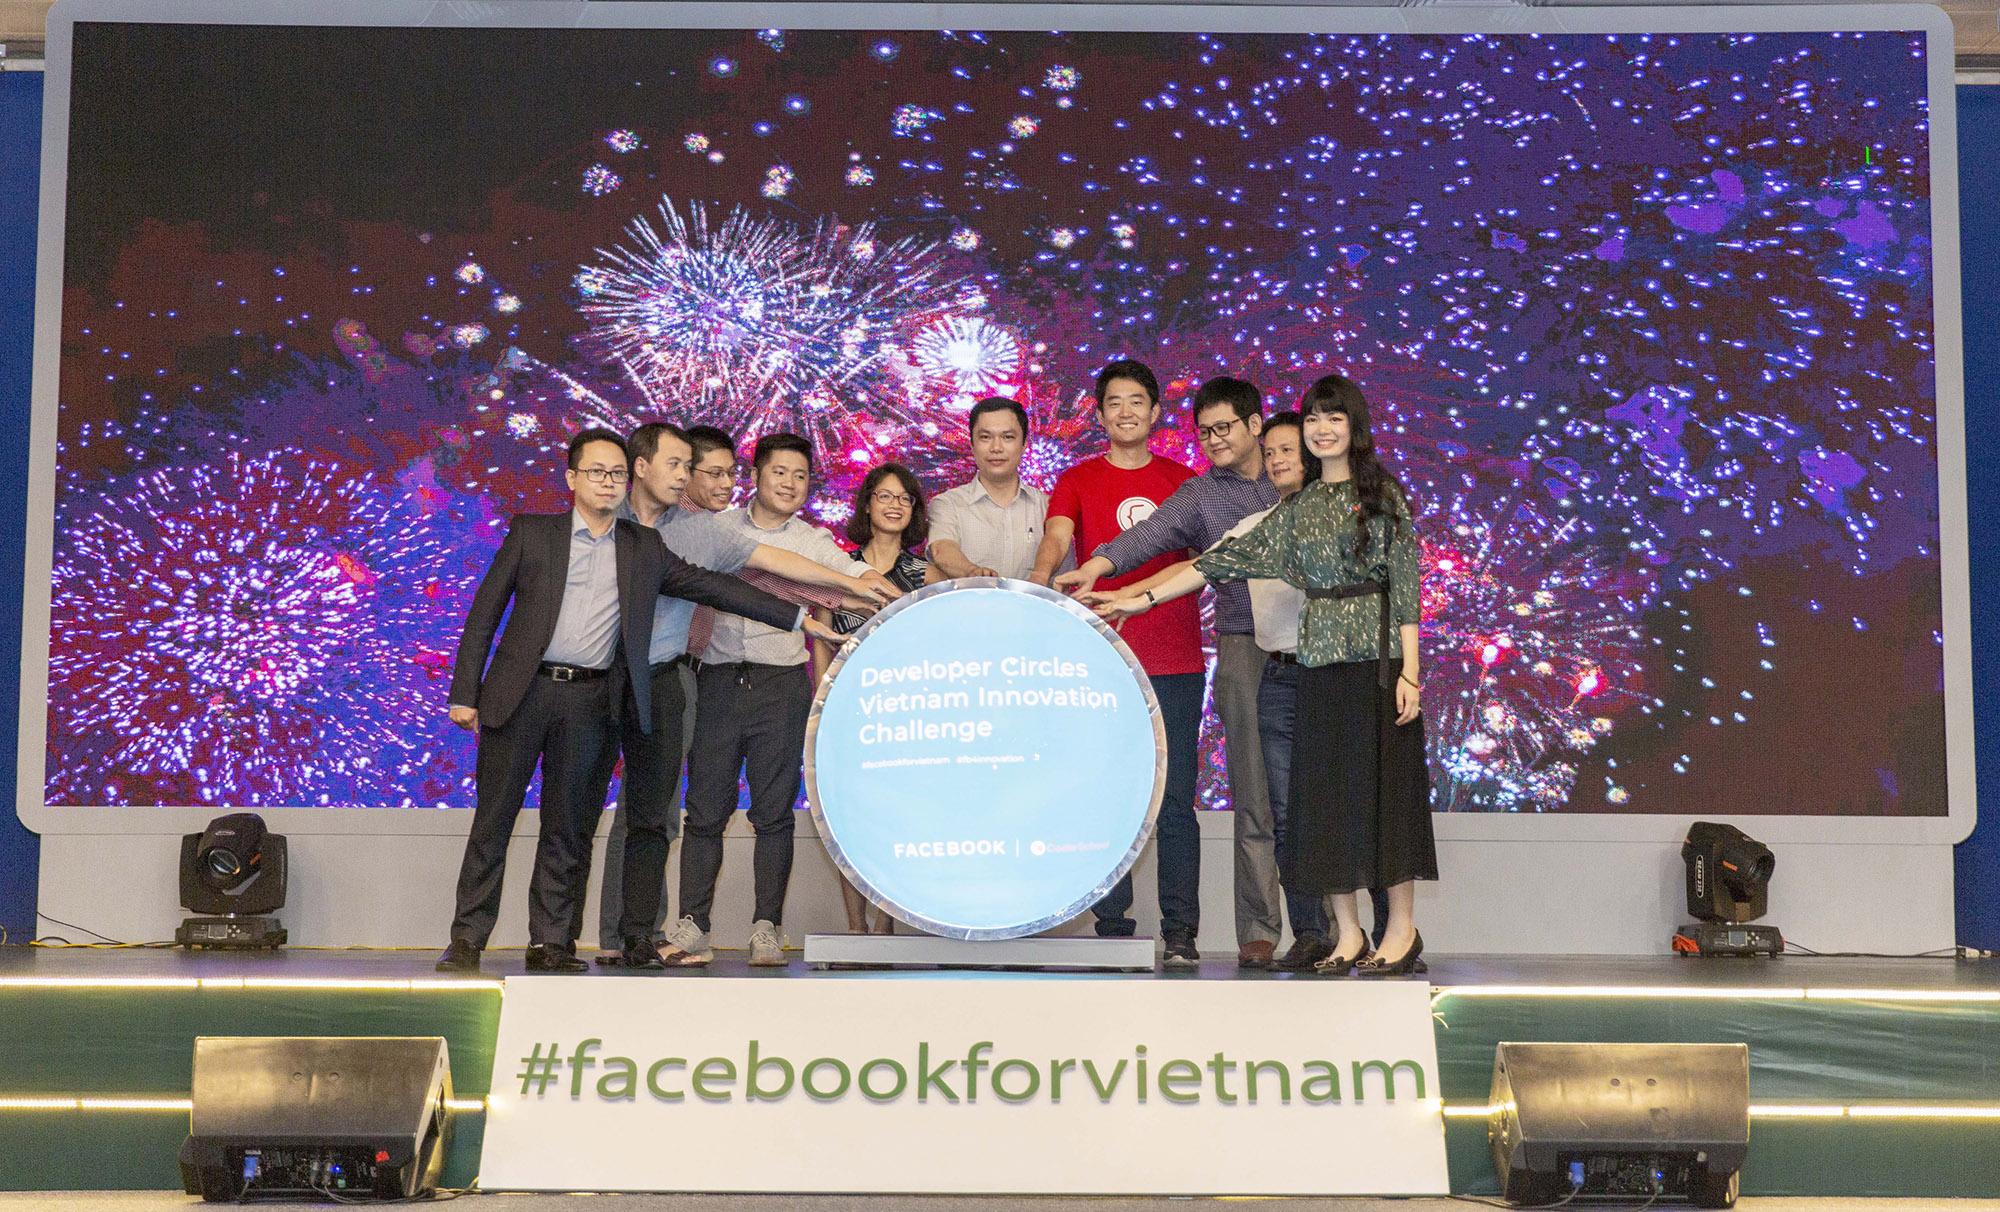 Facebook extends ‘Developer Circles Vietnam Innovation Challenge’ to Hanoi, continues to train 300 more students